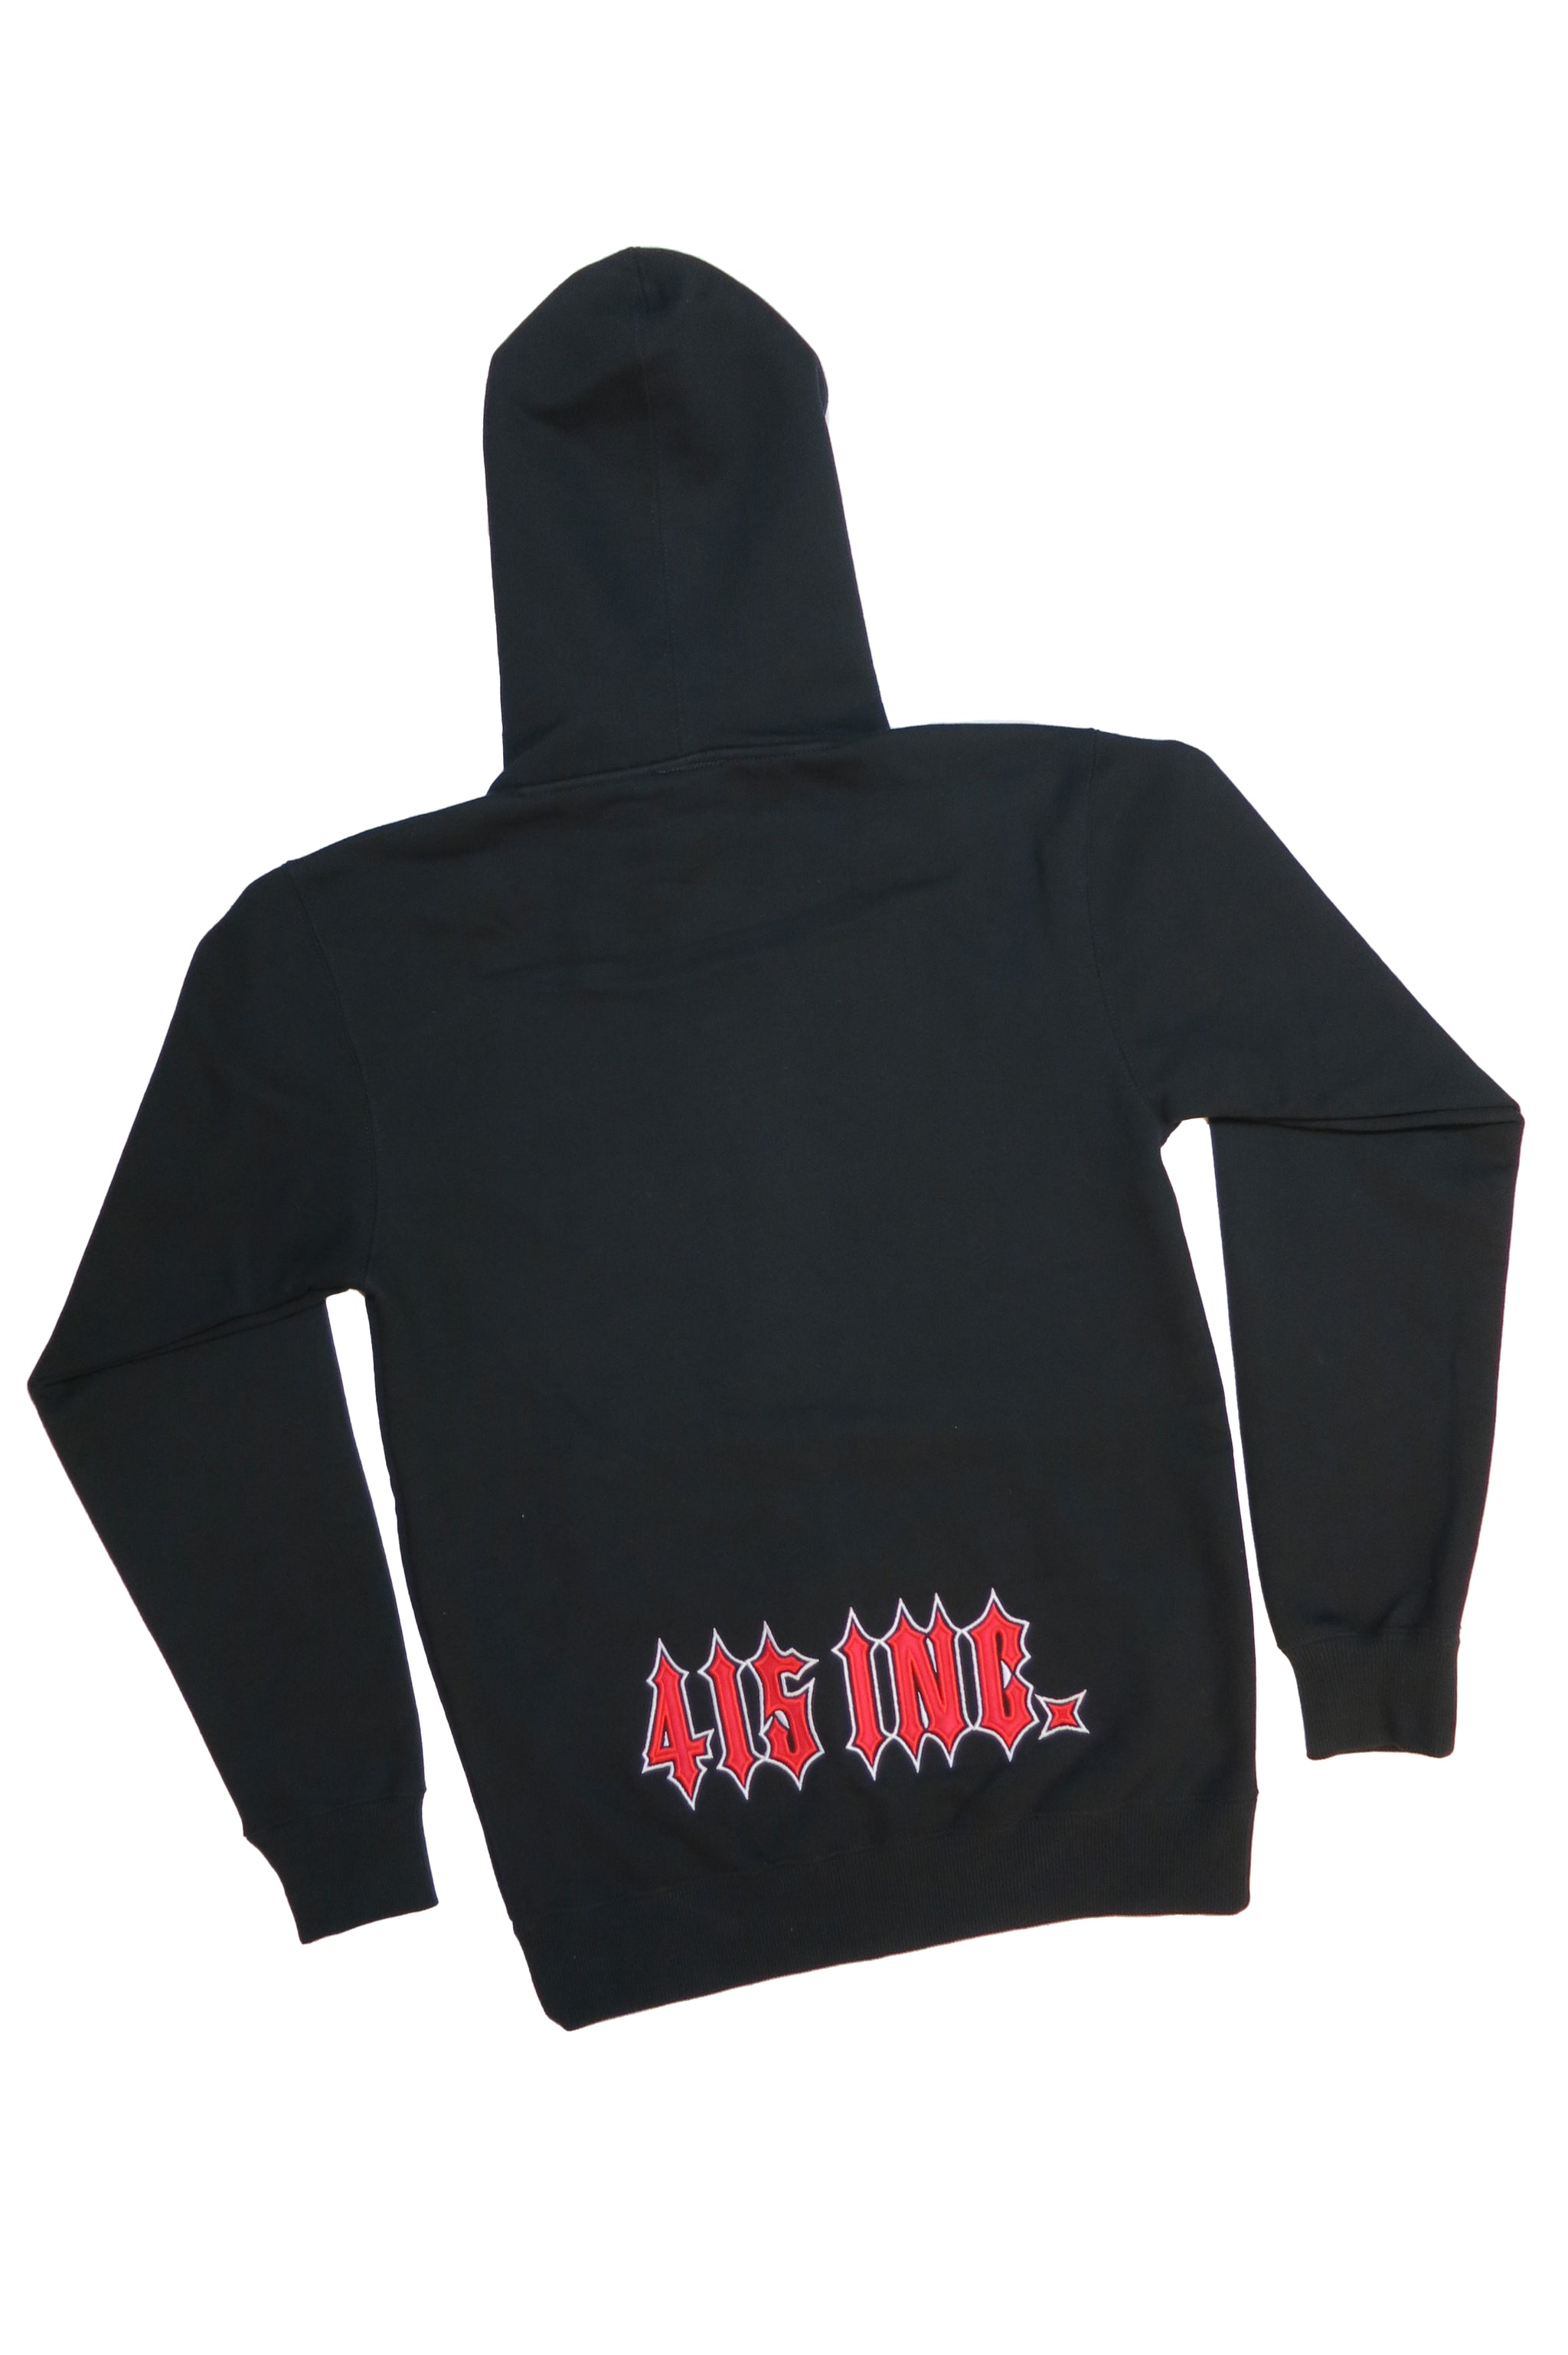 Hooded Spikey - Embroidered Frisco Sweatshirt 415 Clothing, Zipper